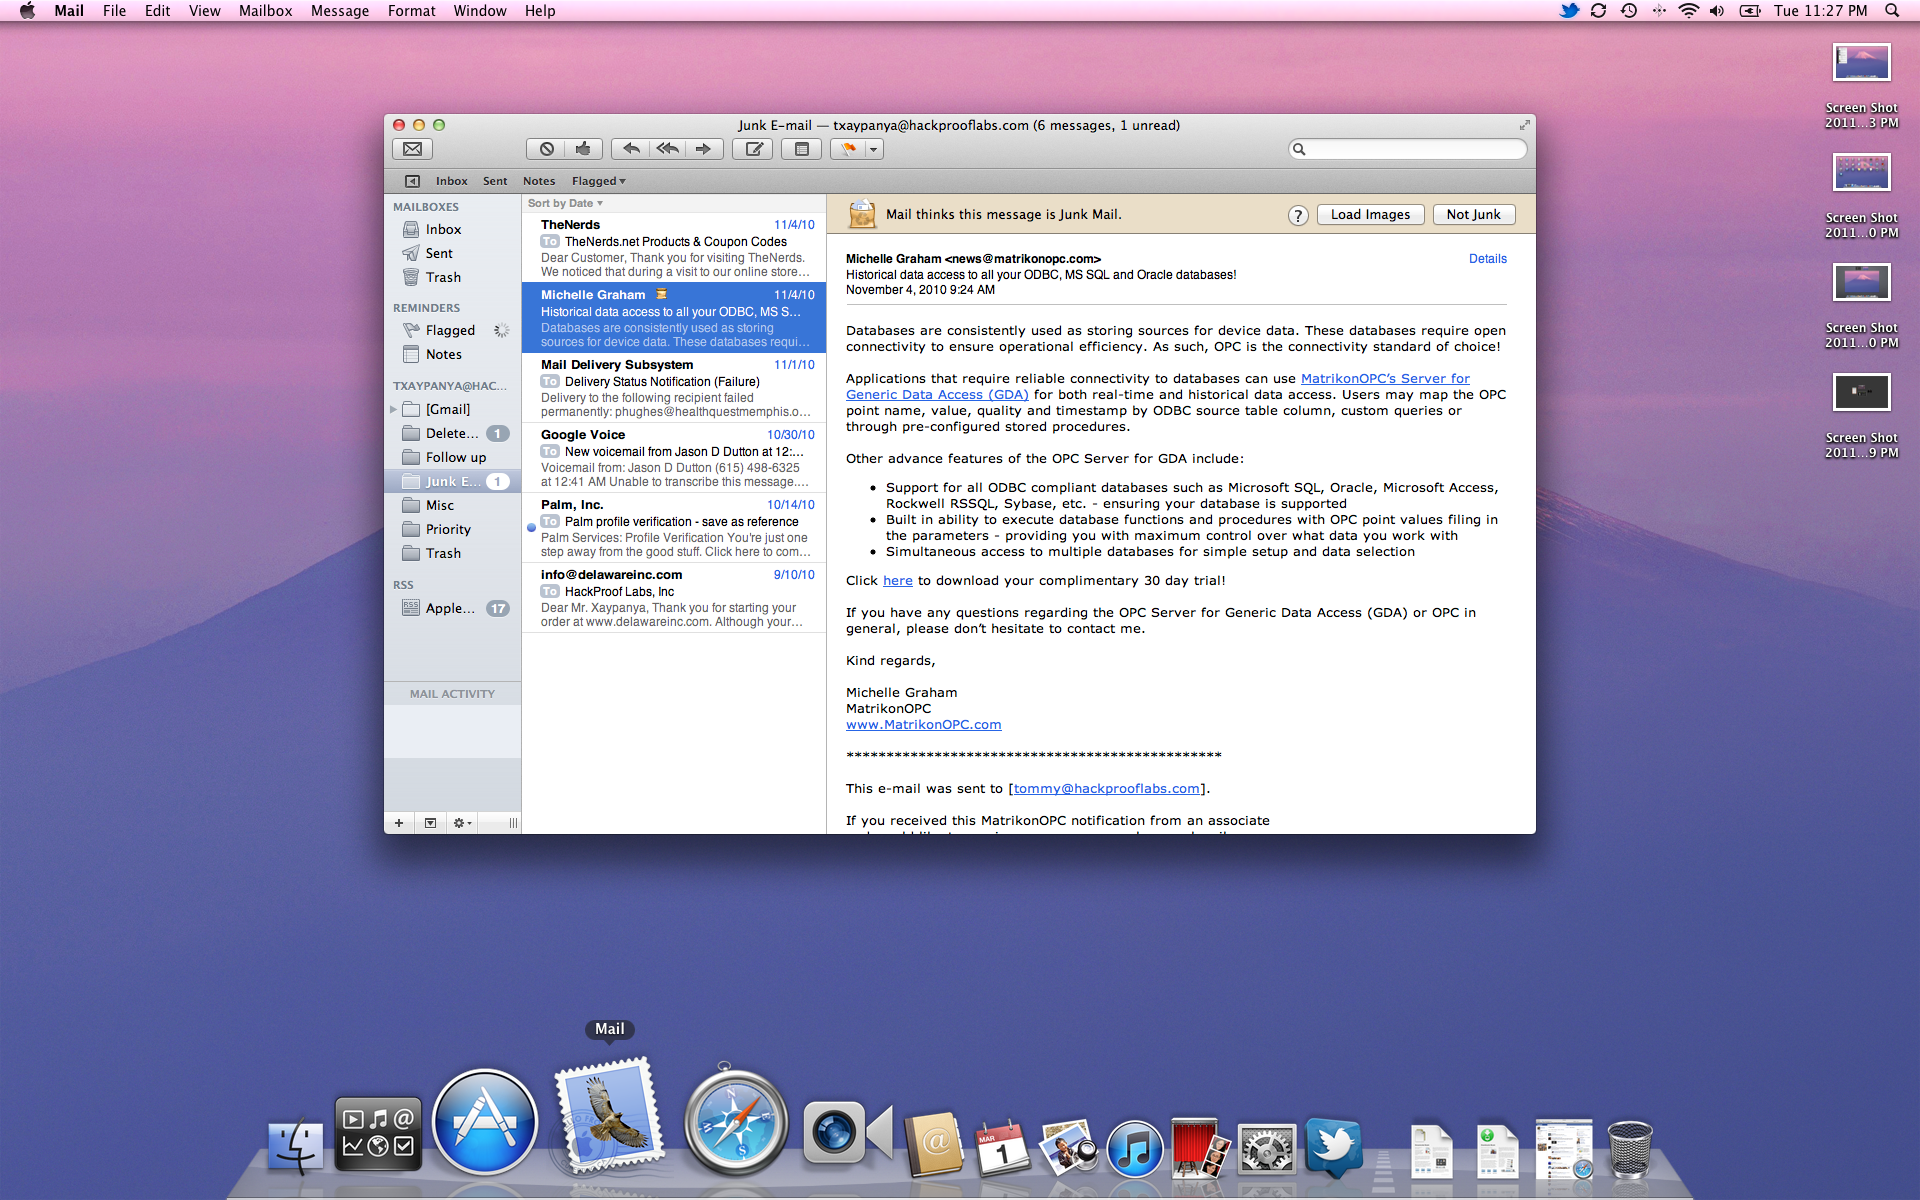 Preview download for mac os x download